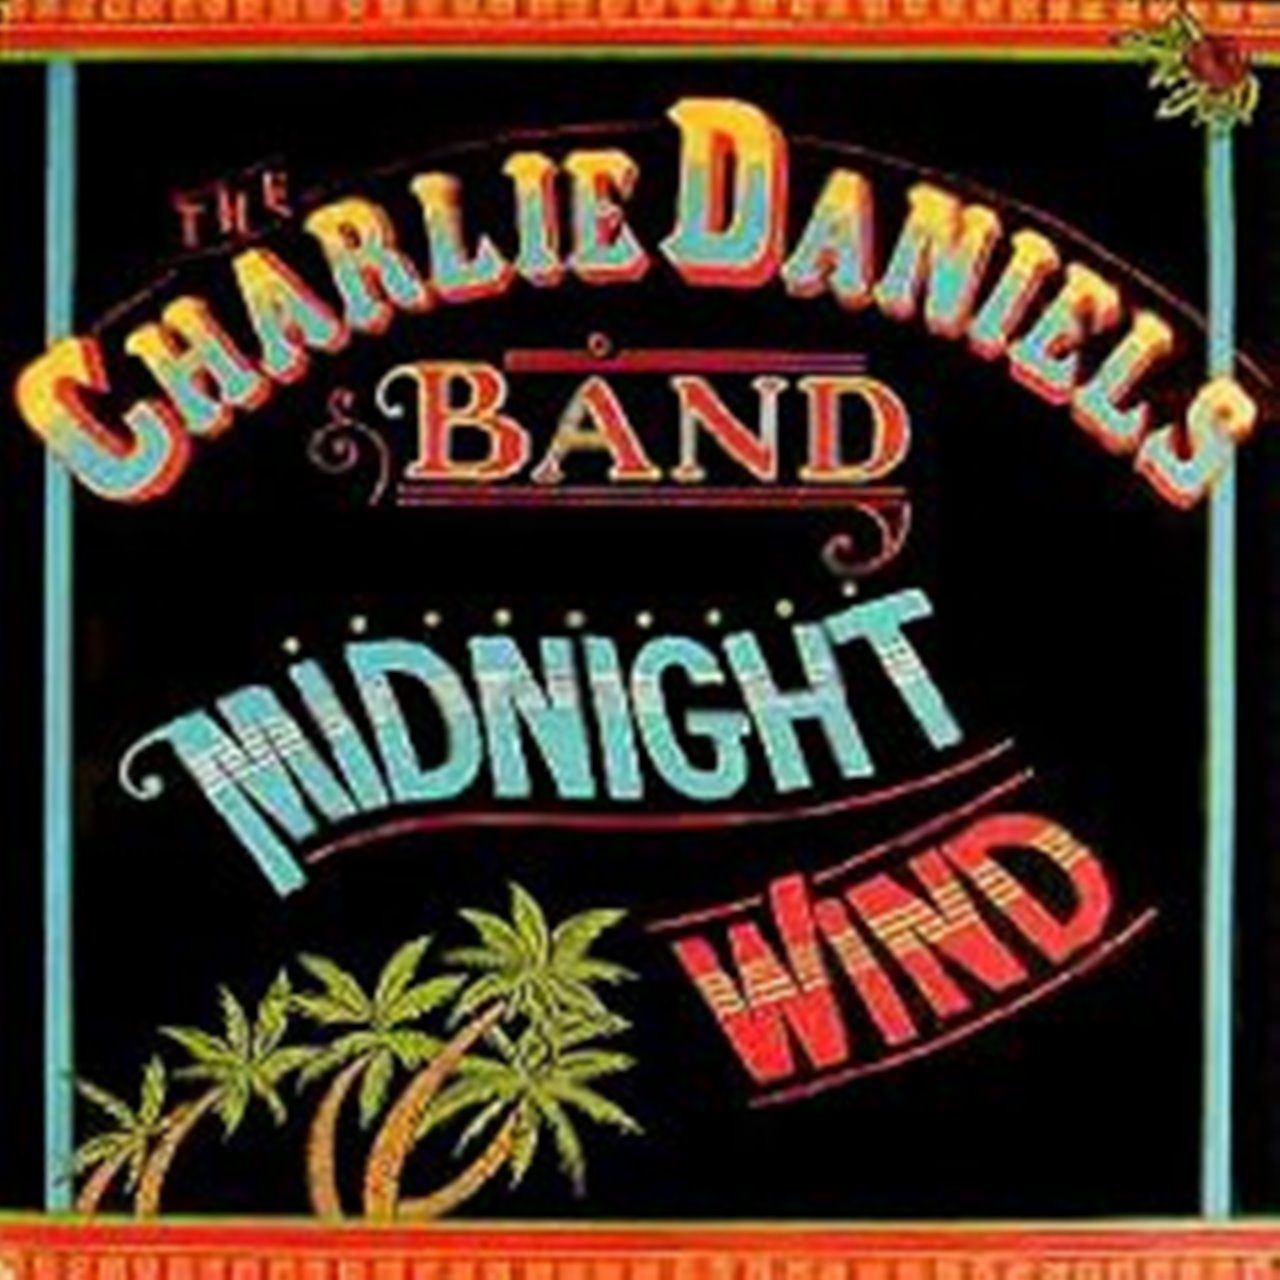 Charlie Daniels Band – Midnight Wind cover album